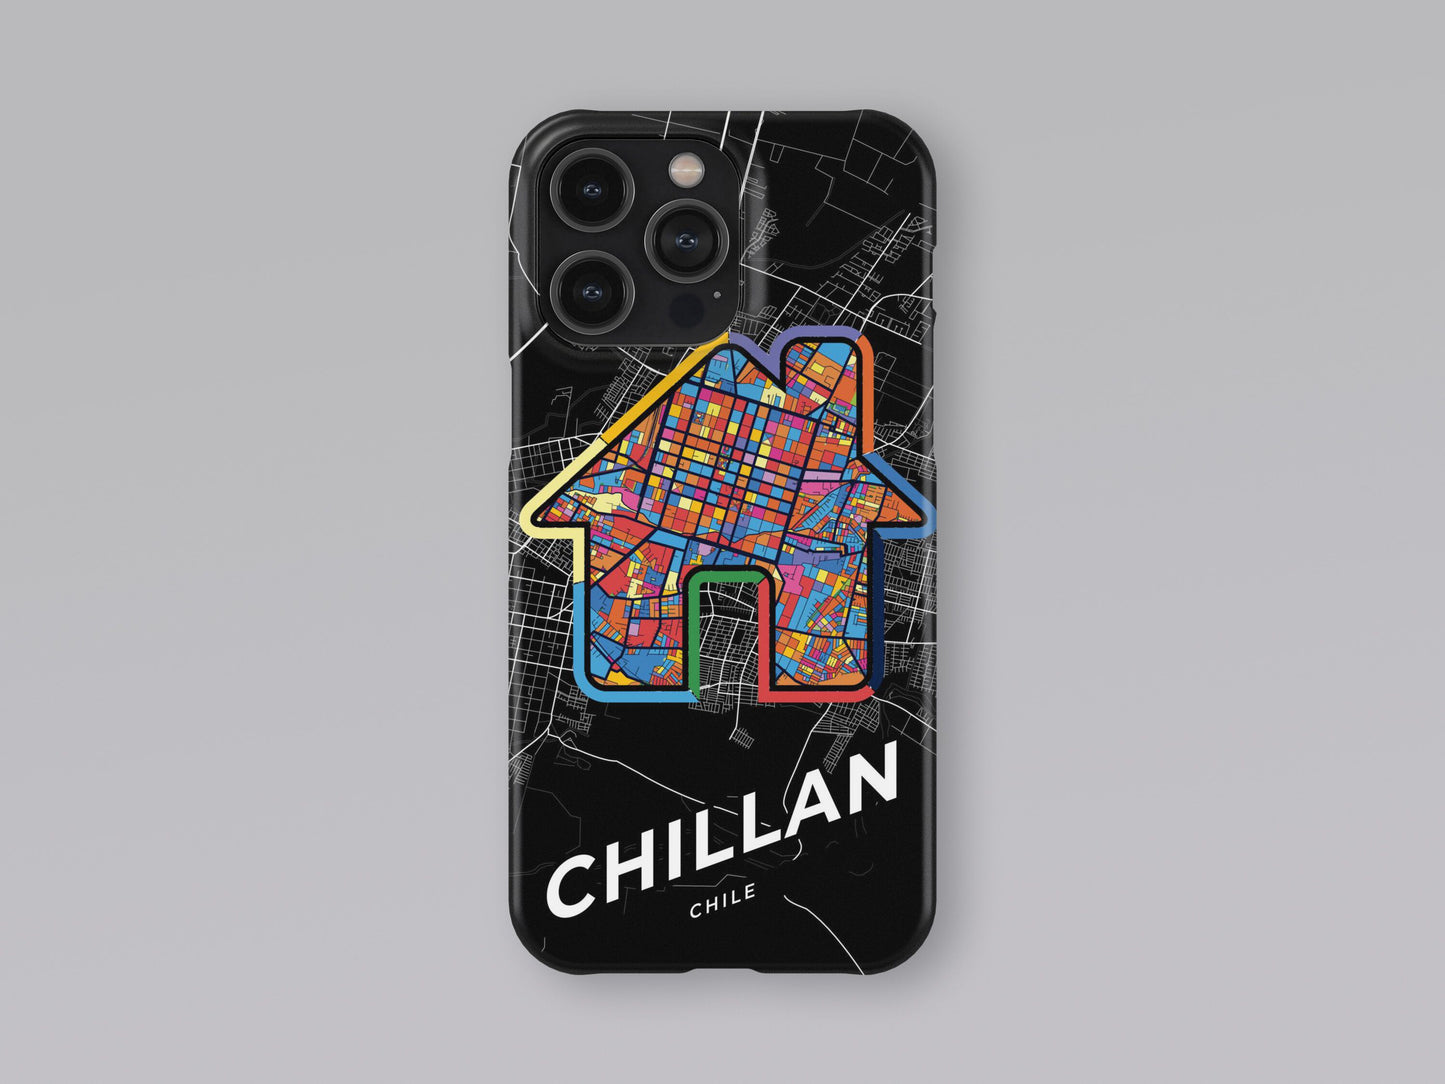 Chillan Chile slim phone case with colorful icon. Birthday, wedding or housewarming gift. Couple match cases. 3